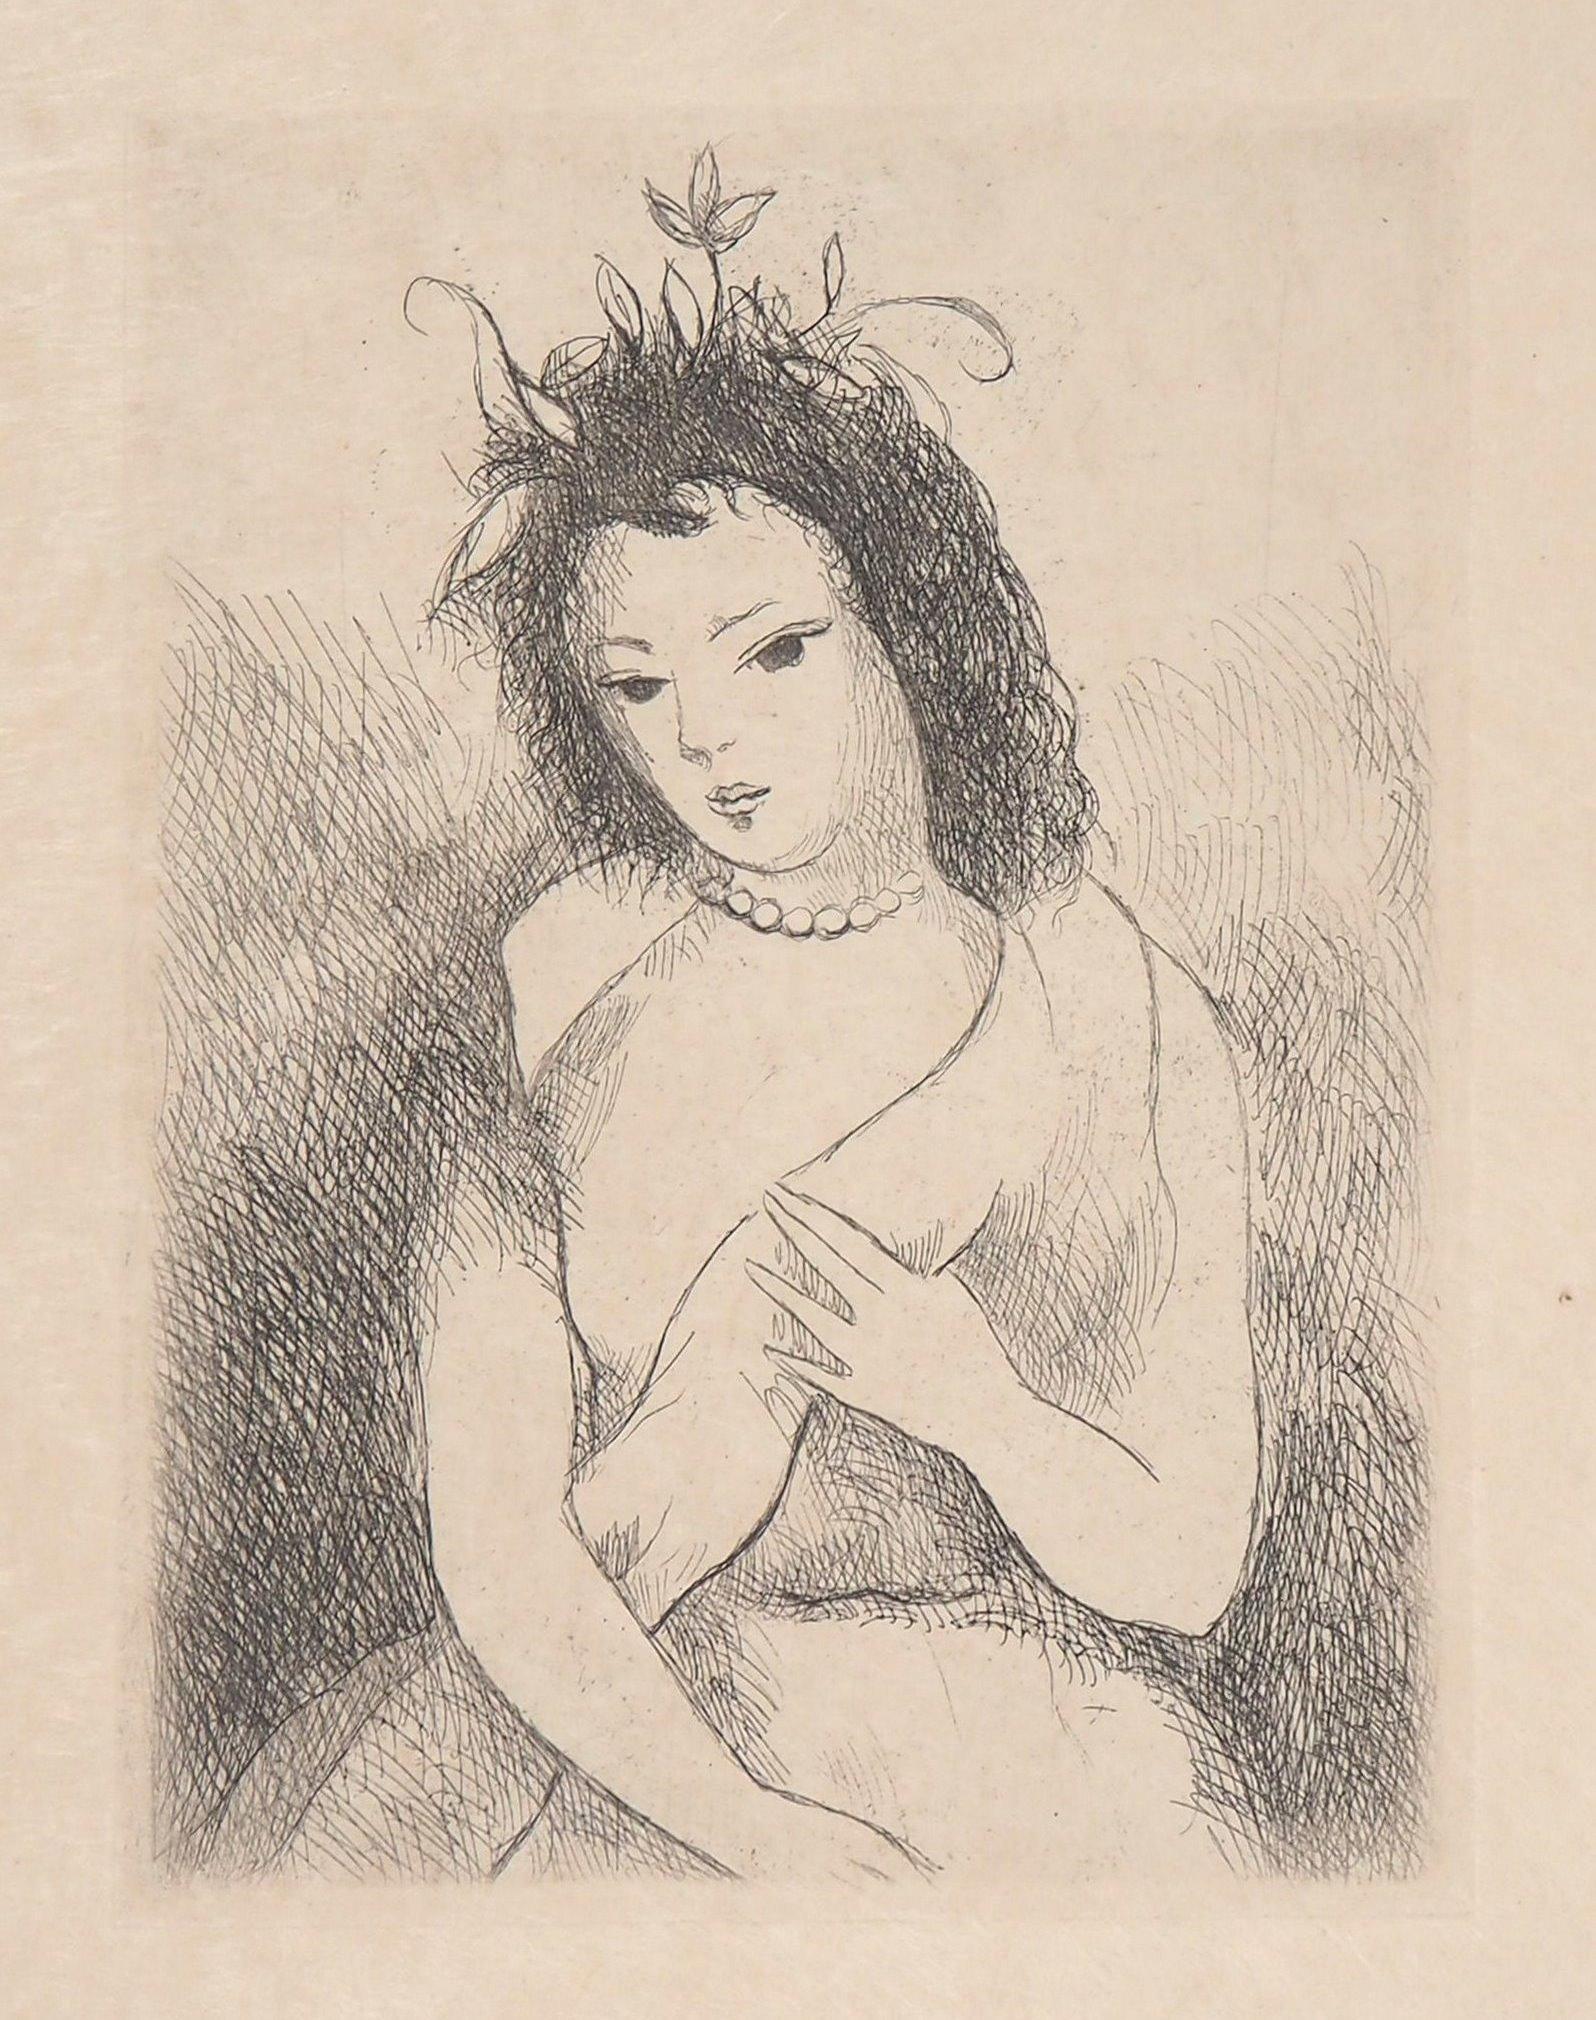 Marie Laurencin Figurative Print - Young Girl with Pearl Necklace, 1945 - Original Etching (Marchesseau #236)